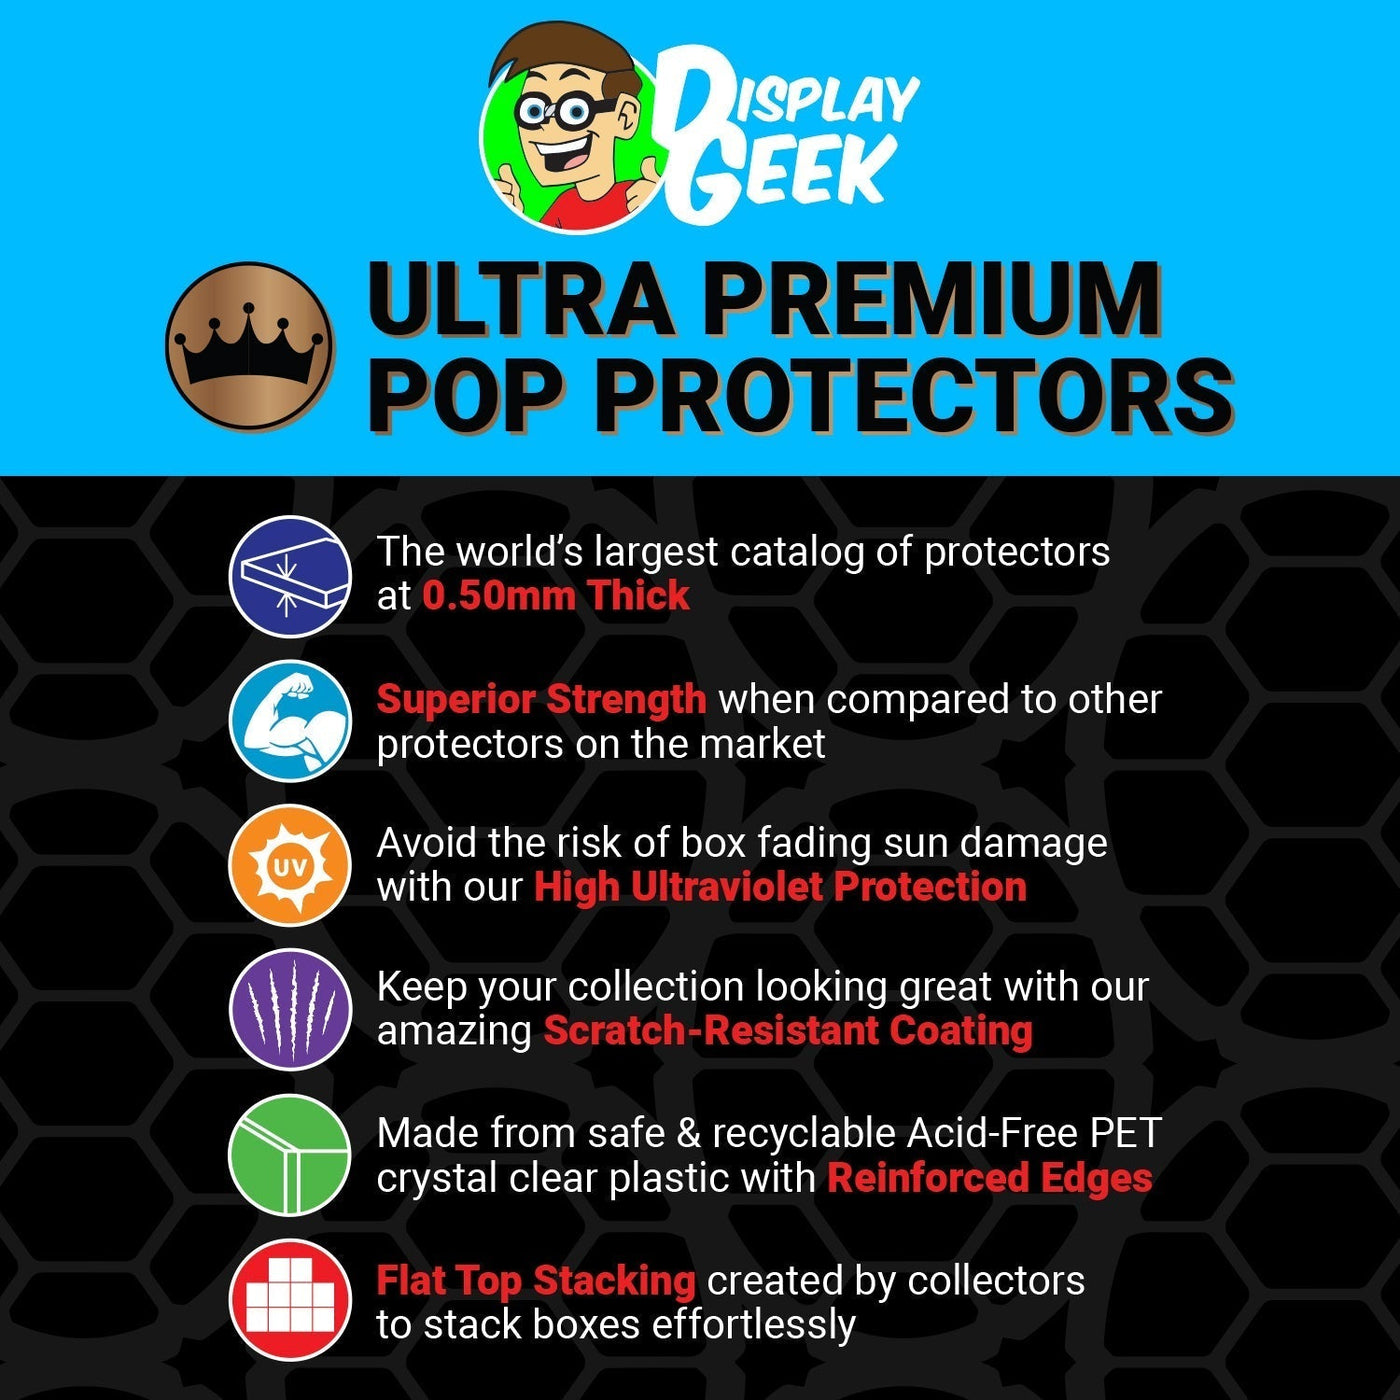 Pop Protector for 4 Pack Four Heavenly Kings Funko Pop on The Protector Guide App by Display Geek